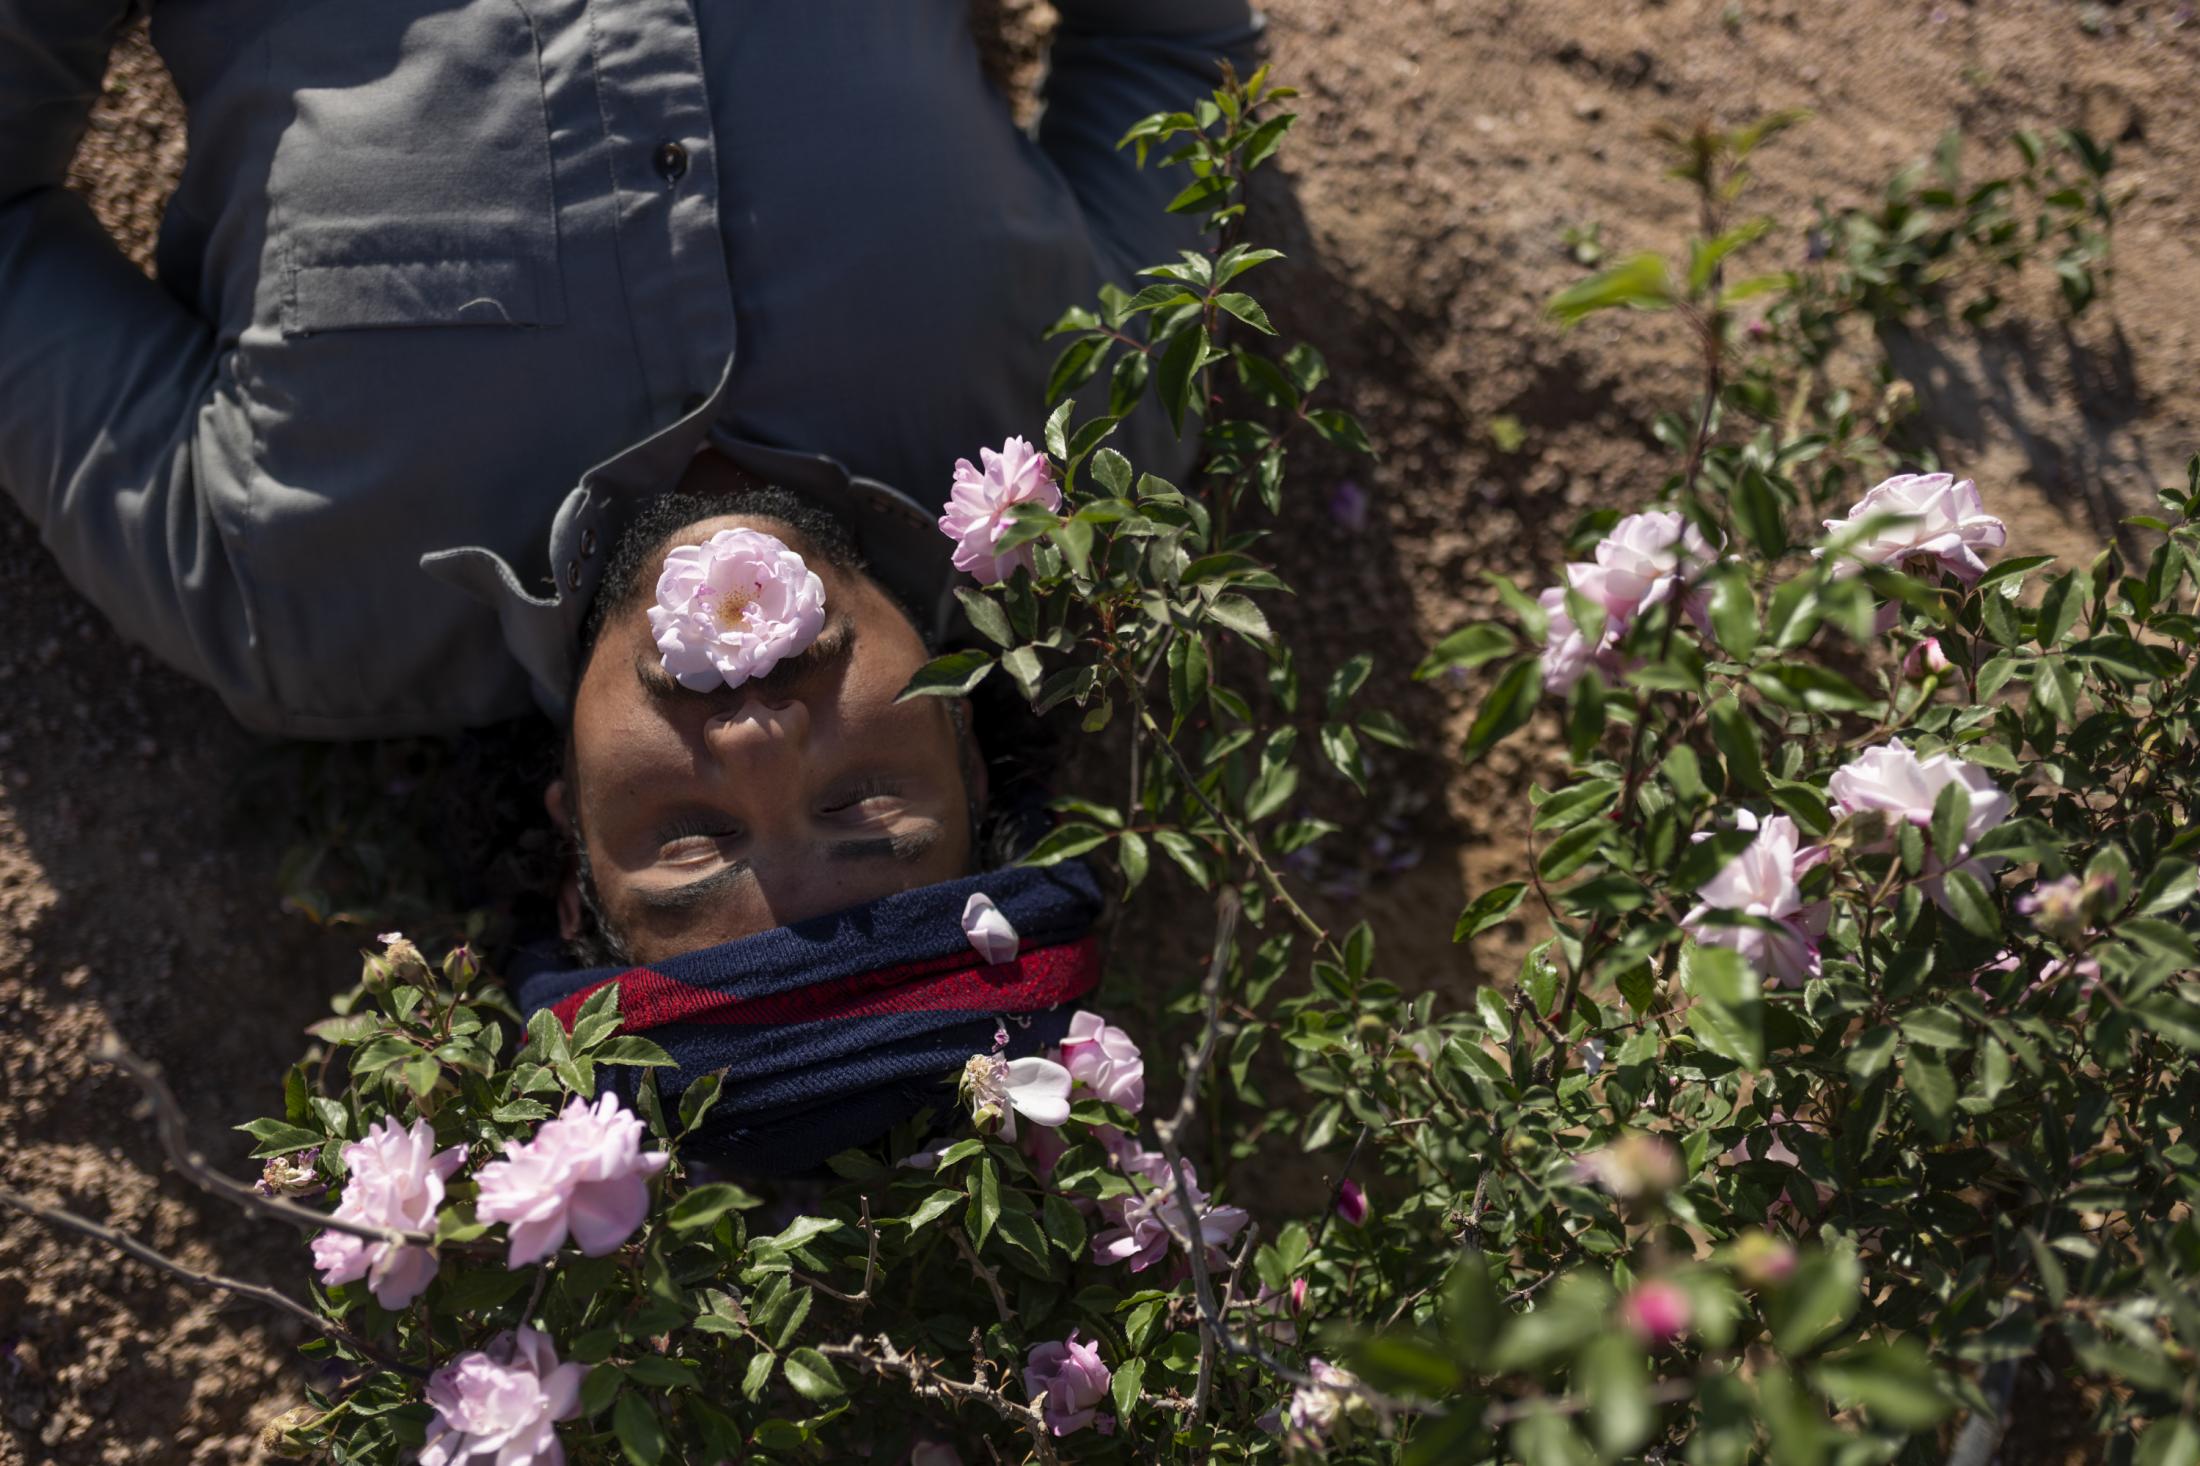 Moussa Algebaly (25) from the Jebeleya tribe lies under the &quot;flower&quot; plant...